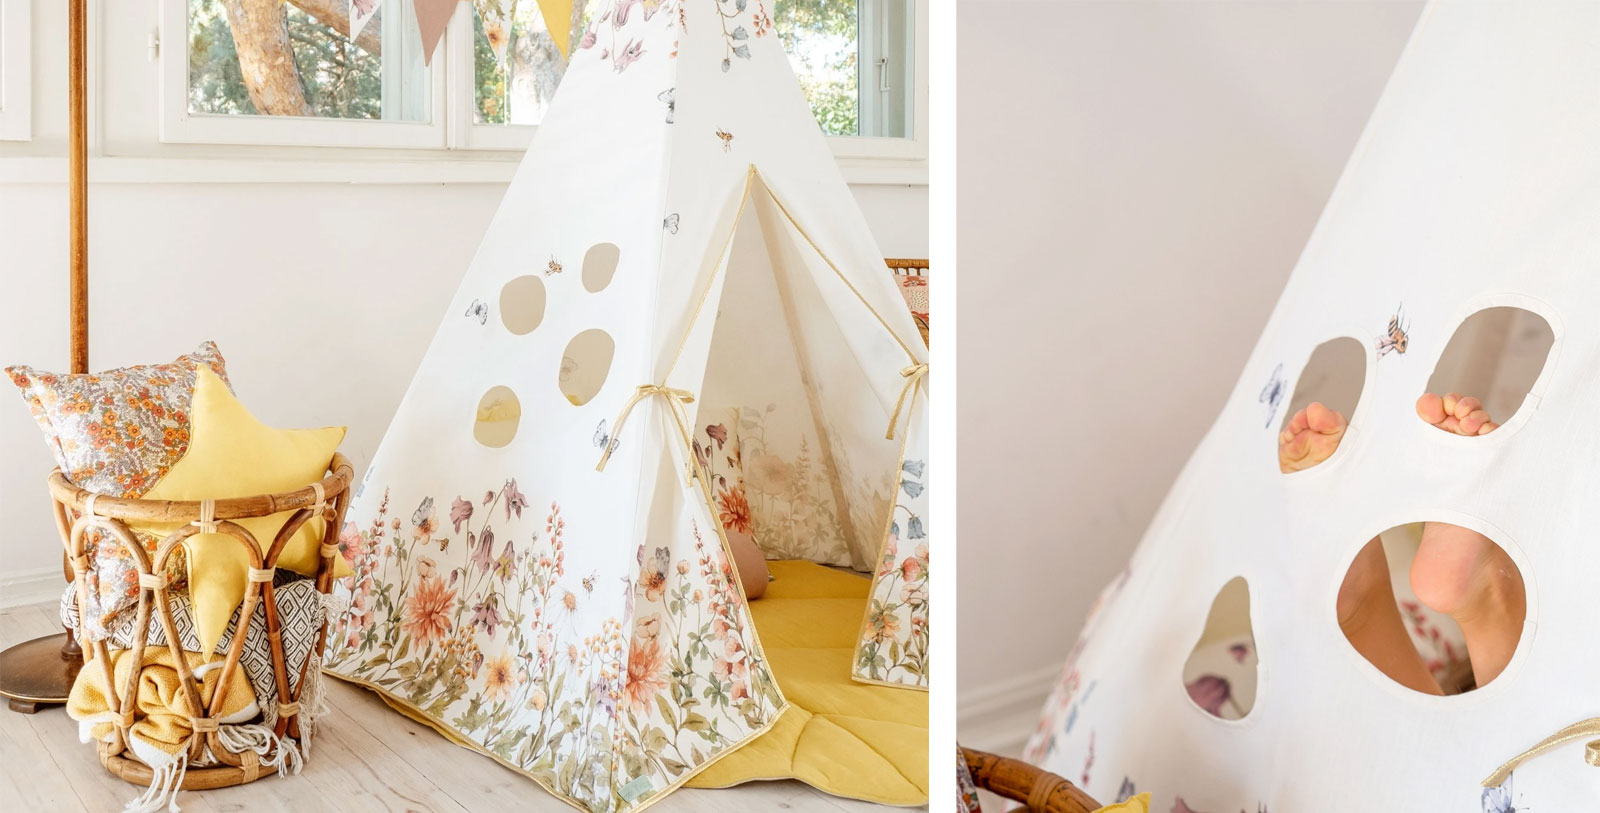 Classic teepee with patterns